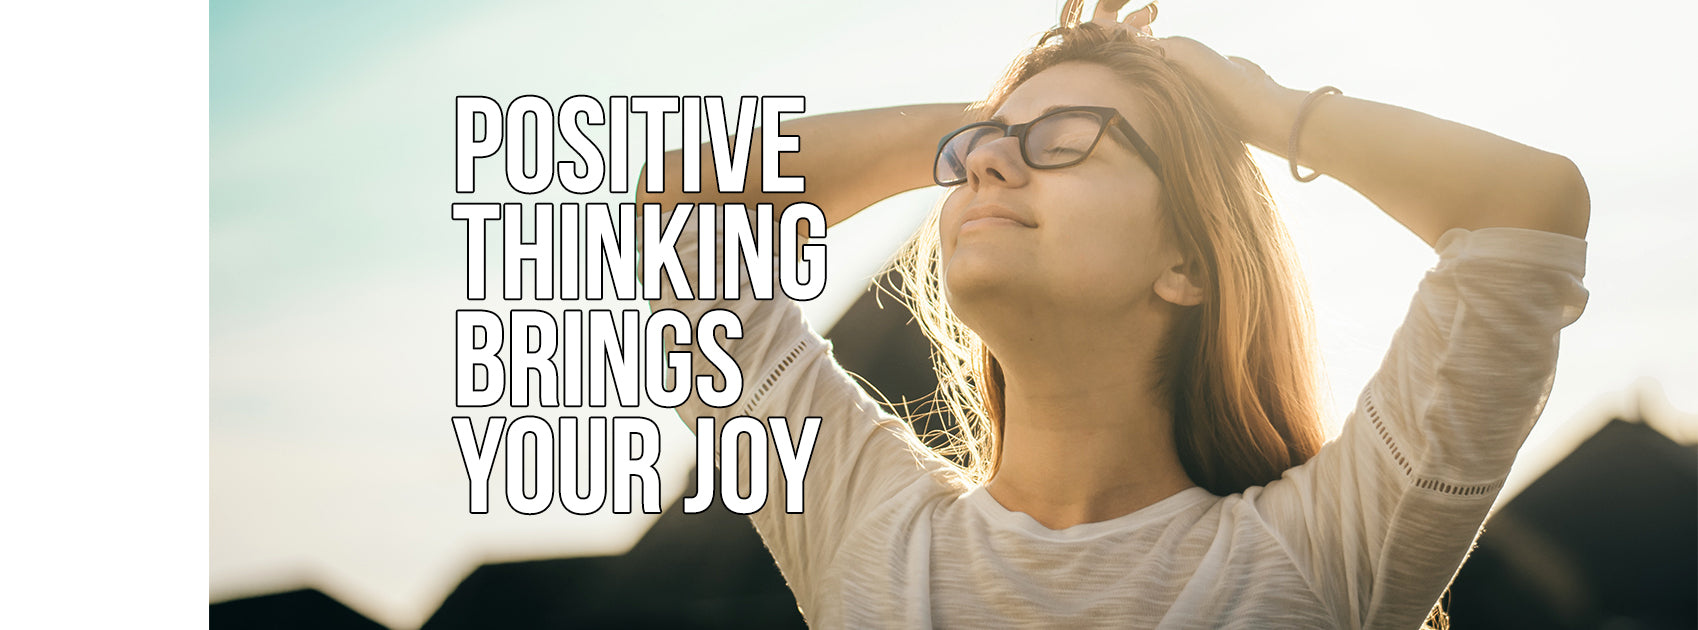 Positive Thinking Brings Your Joy